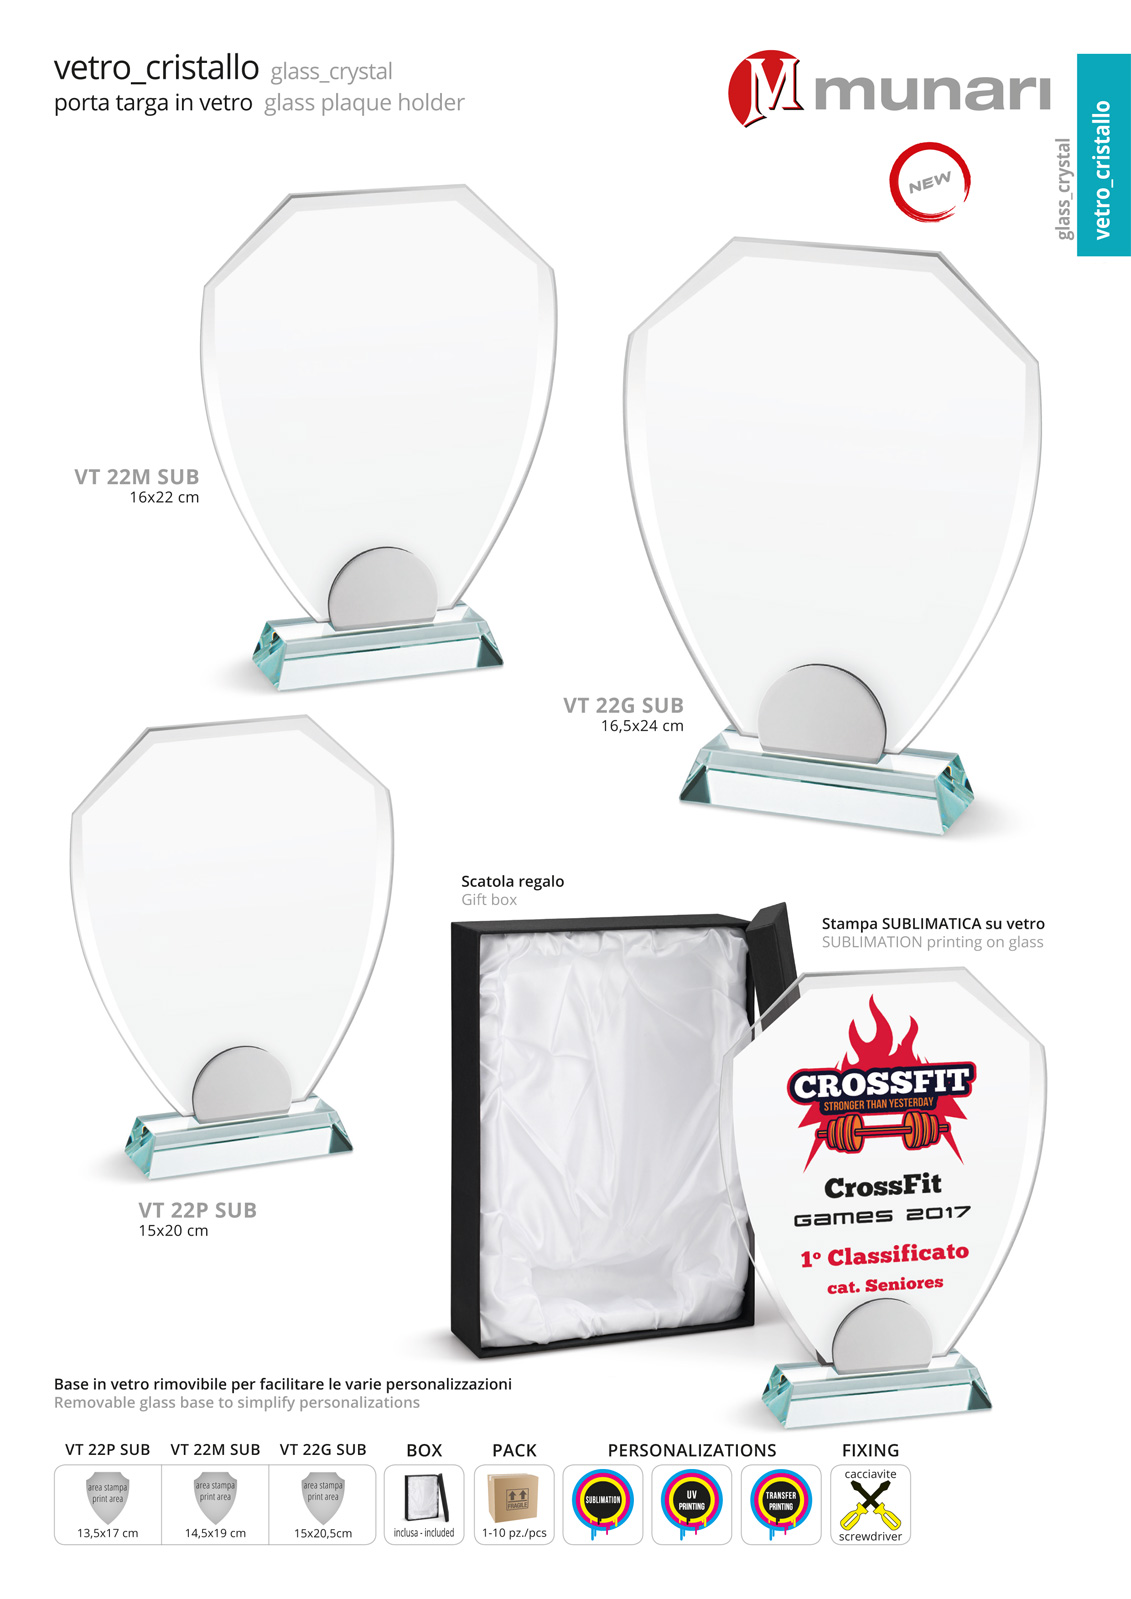 Sublimation glass plaque holder with glass base series VT 22 SUB